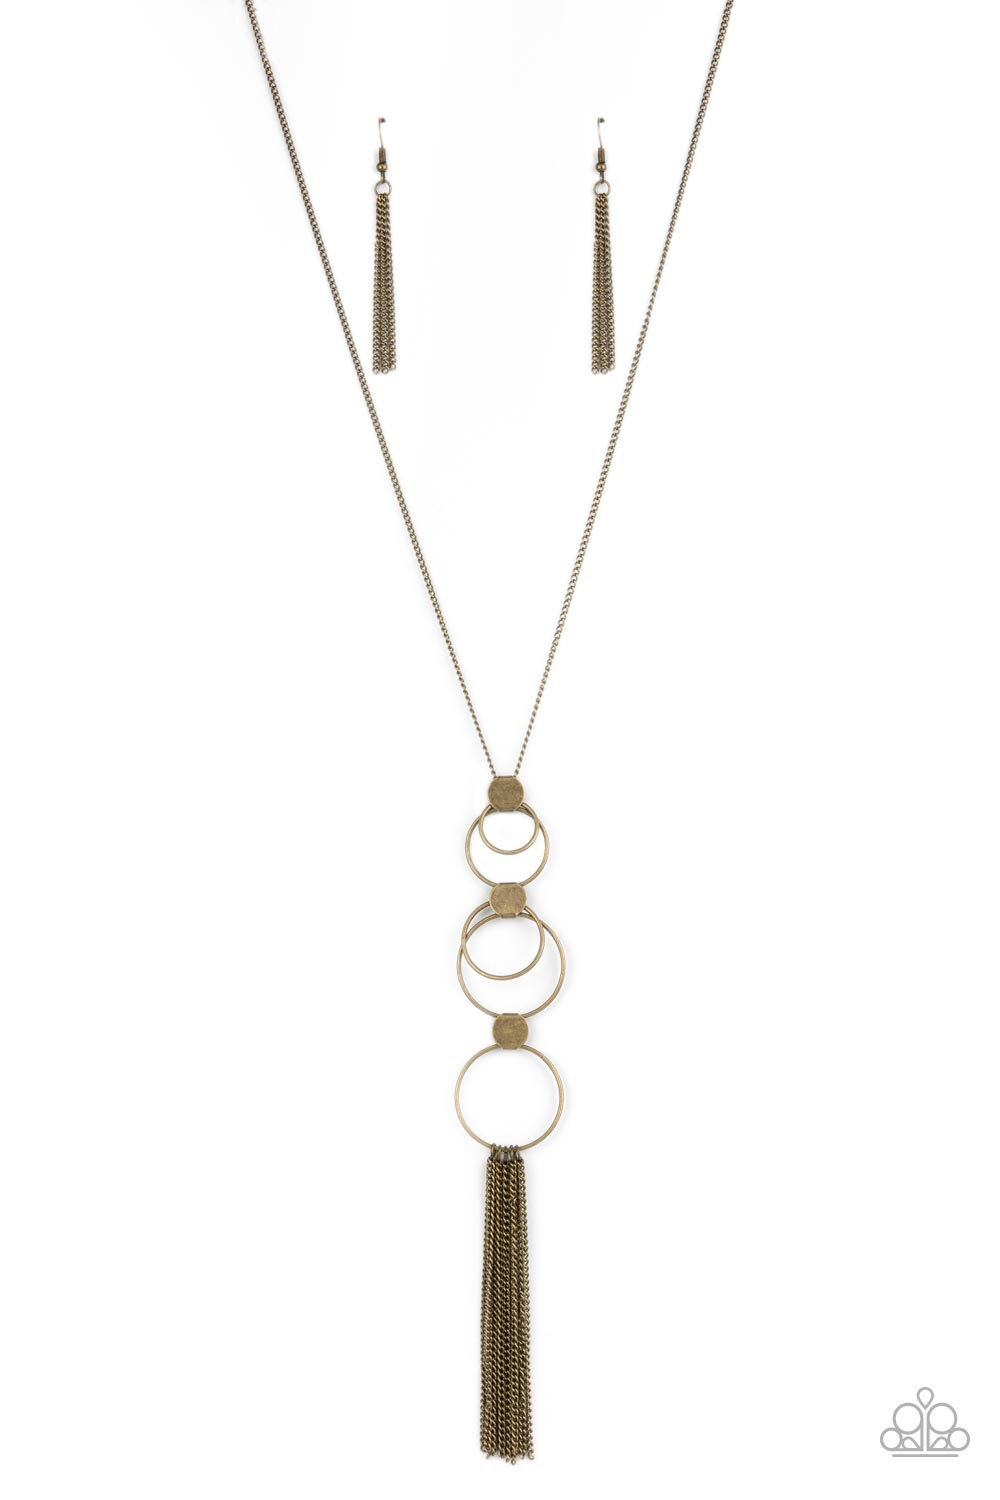 Join The Circle - Brass Necklace Set